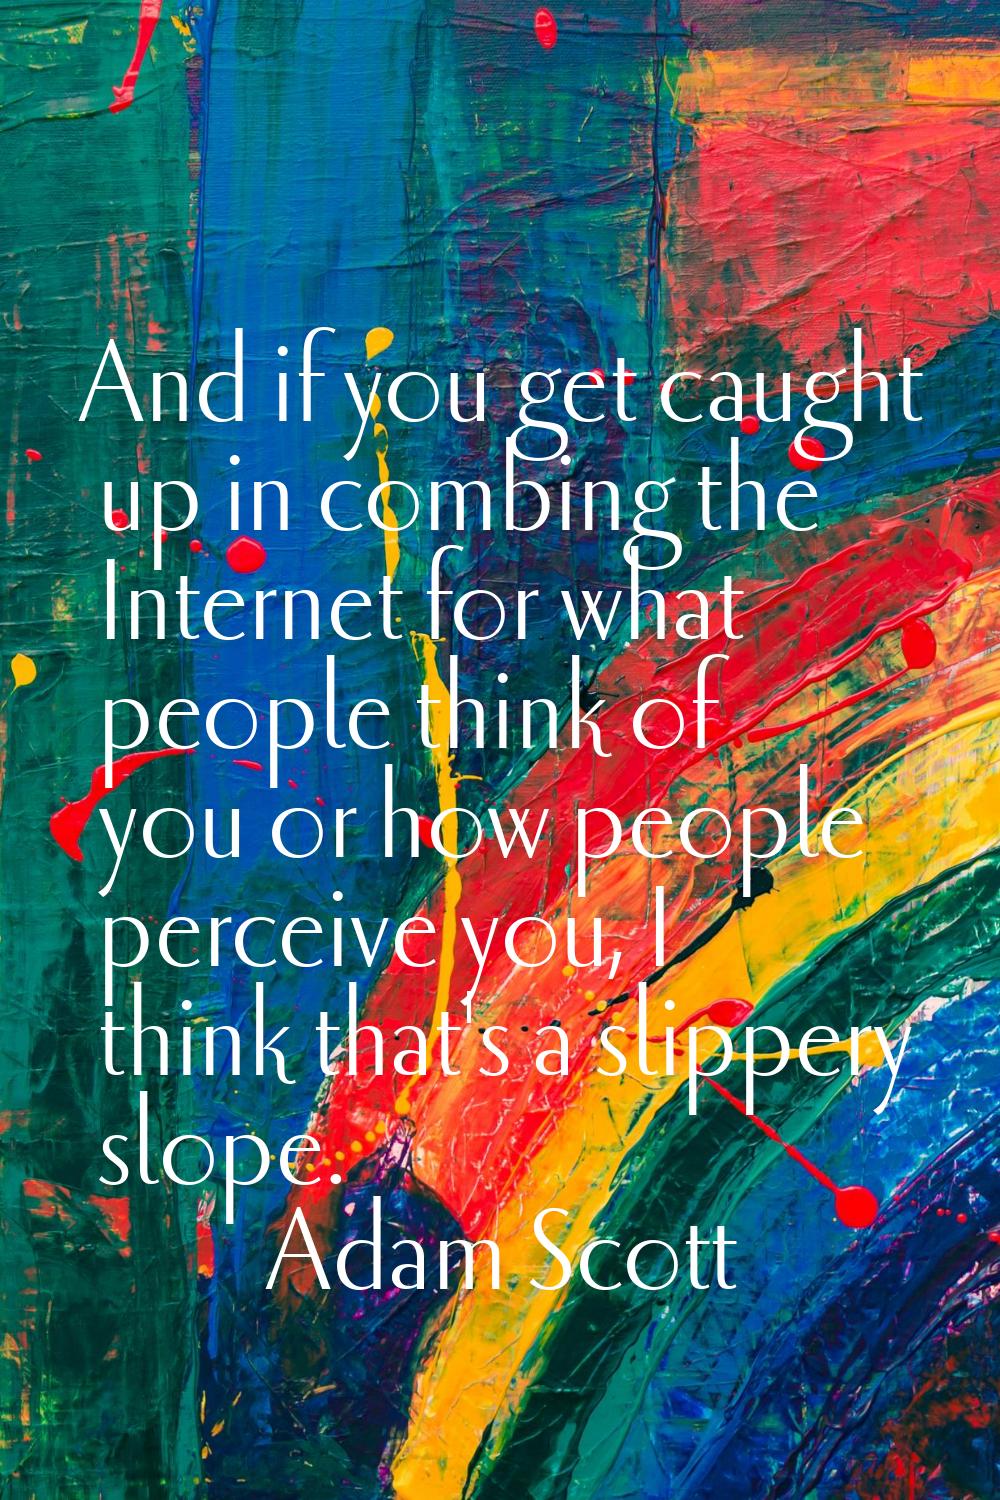 And if you get caught up in combing the Internet for what people think of you or how people perceiv